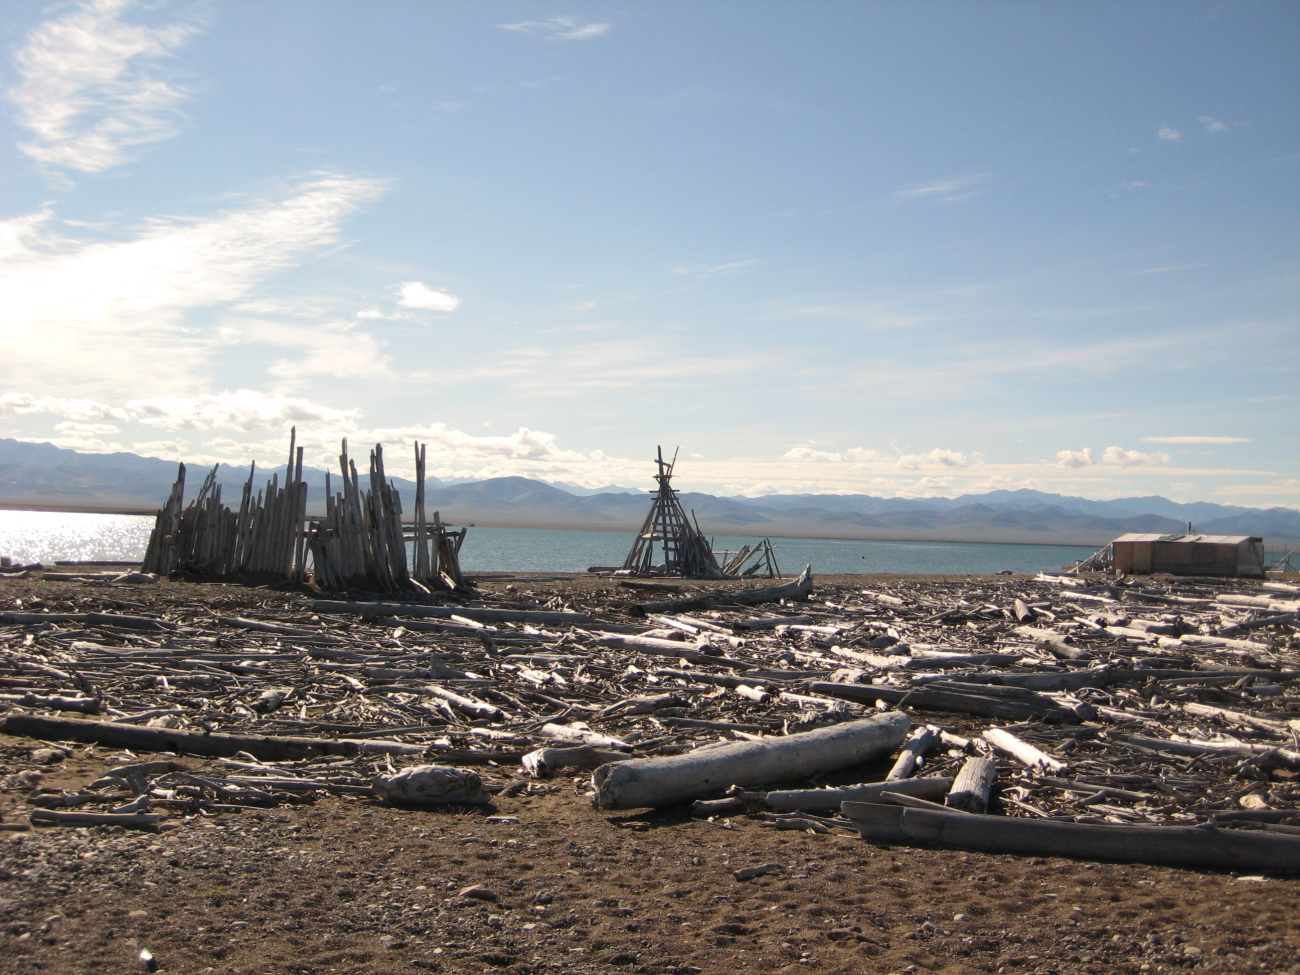 Driftwood structures erected near Demarcation Point